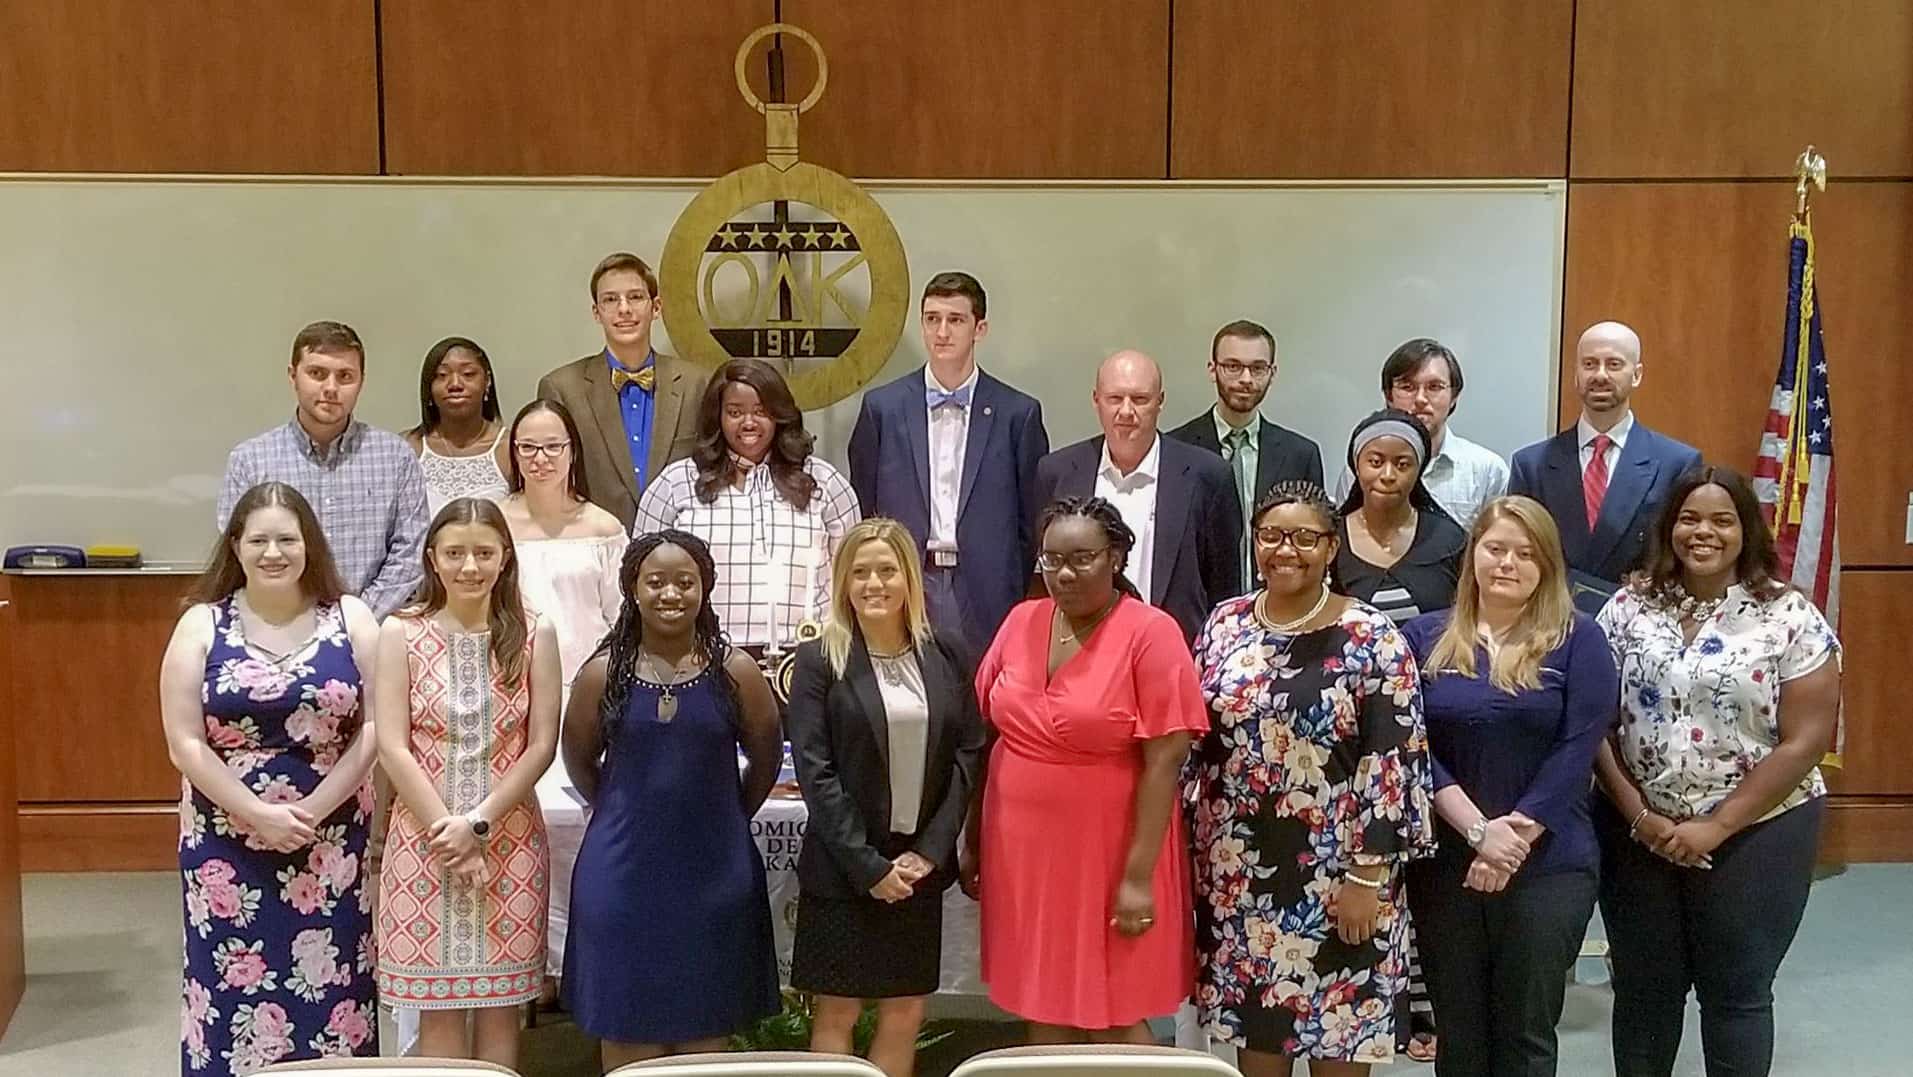 FMU chapter of ODK inducts 24 new members